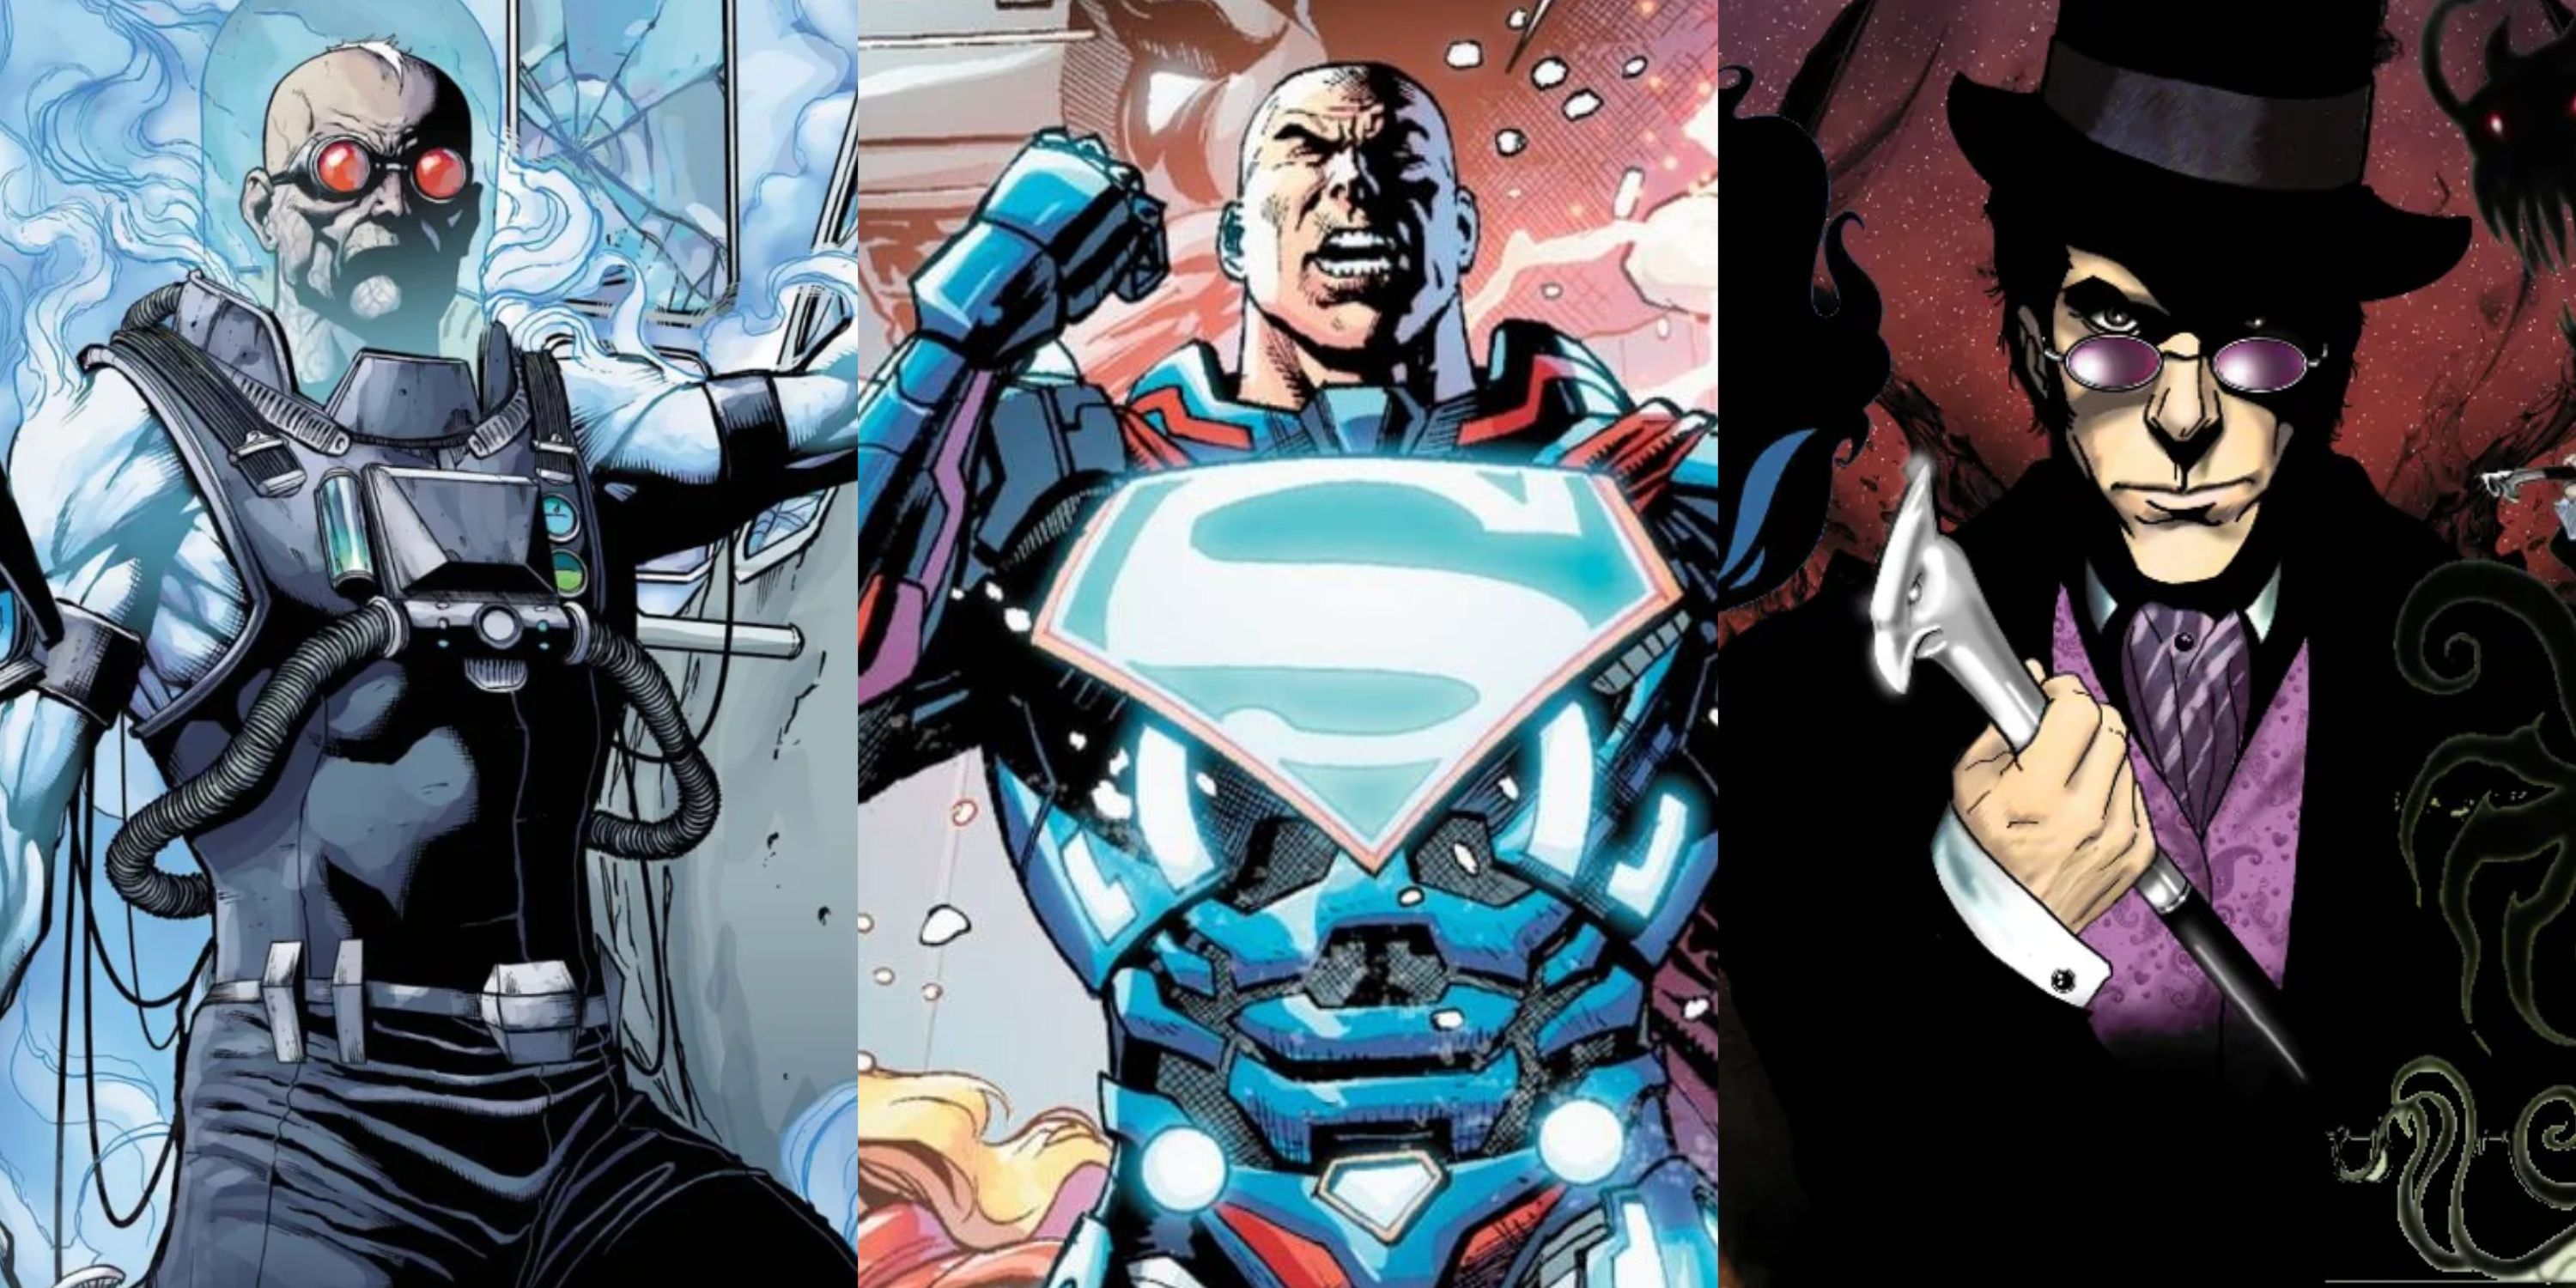 Split image New 52 Mr Freeze, Lex Luthor in his robotic Superman suit, The Shade in DC Comics